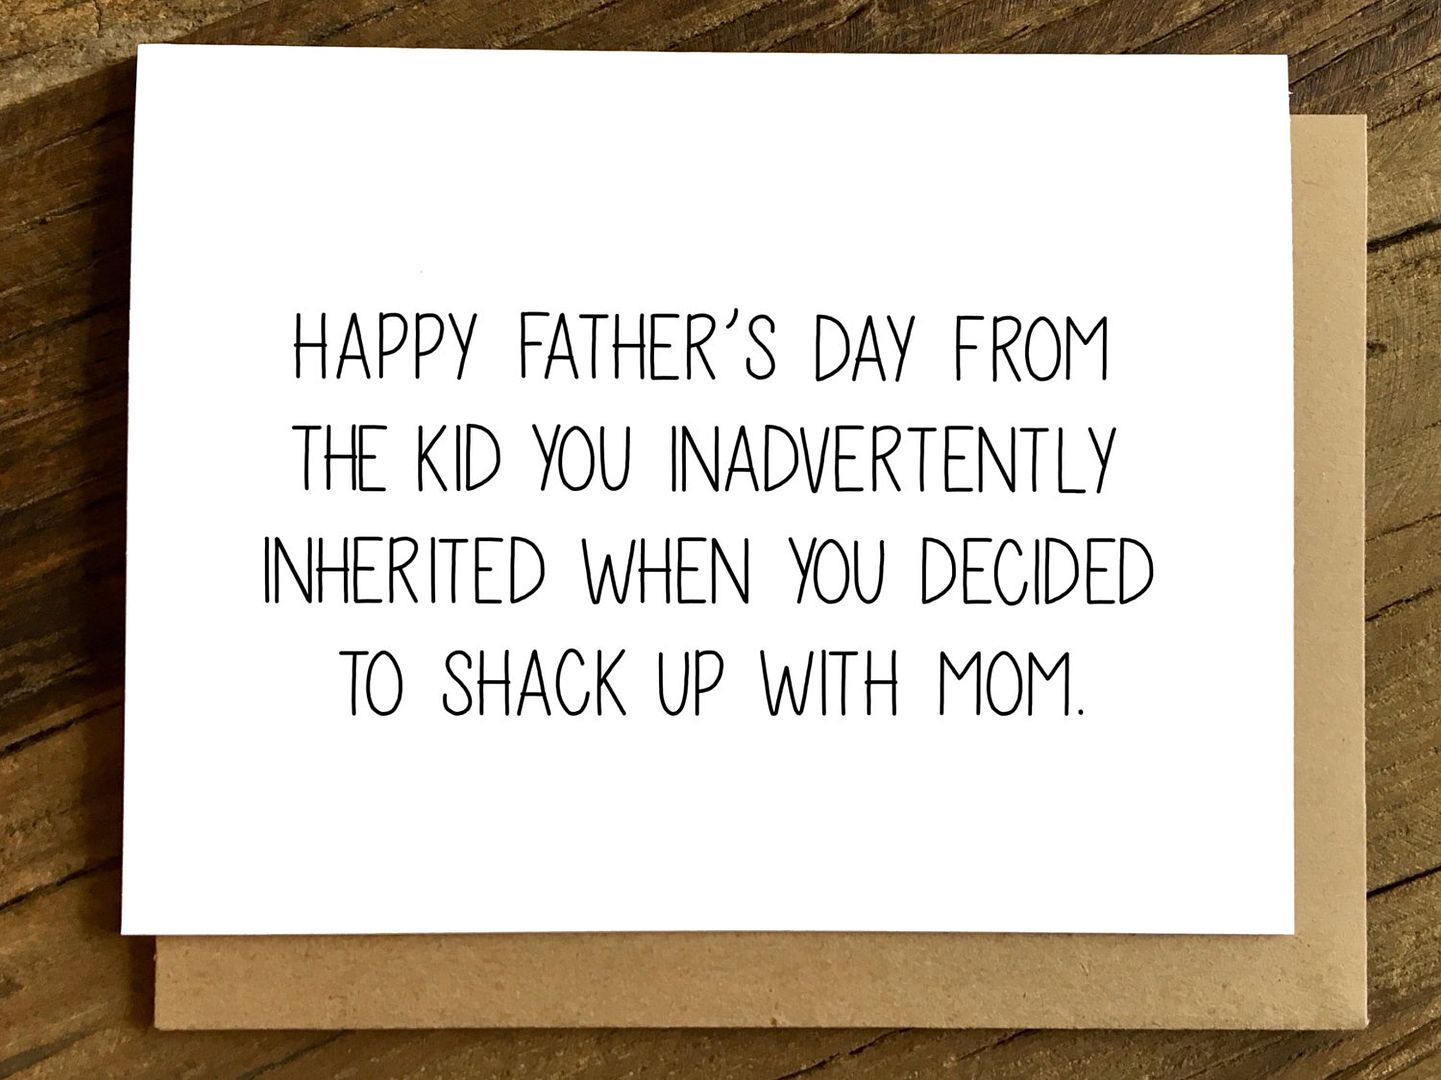 Funniest Father's Day cards: Step Dad Father's Day Card from Cheeky Kumquat